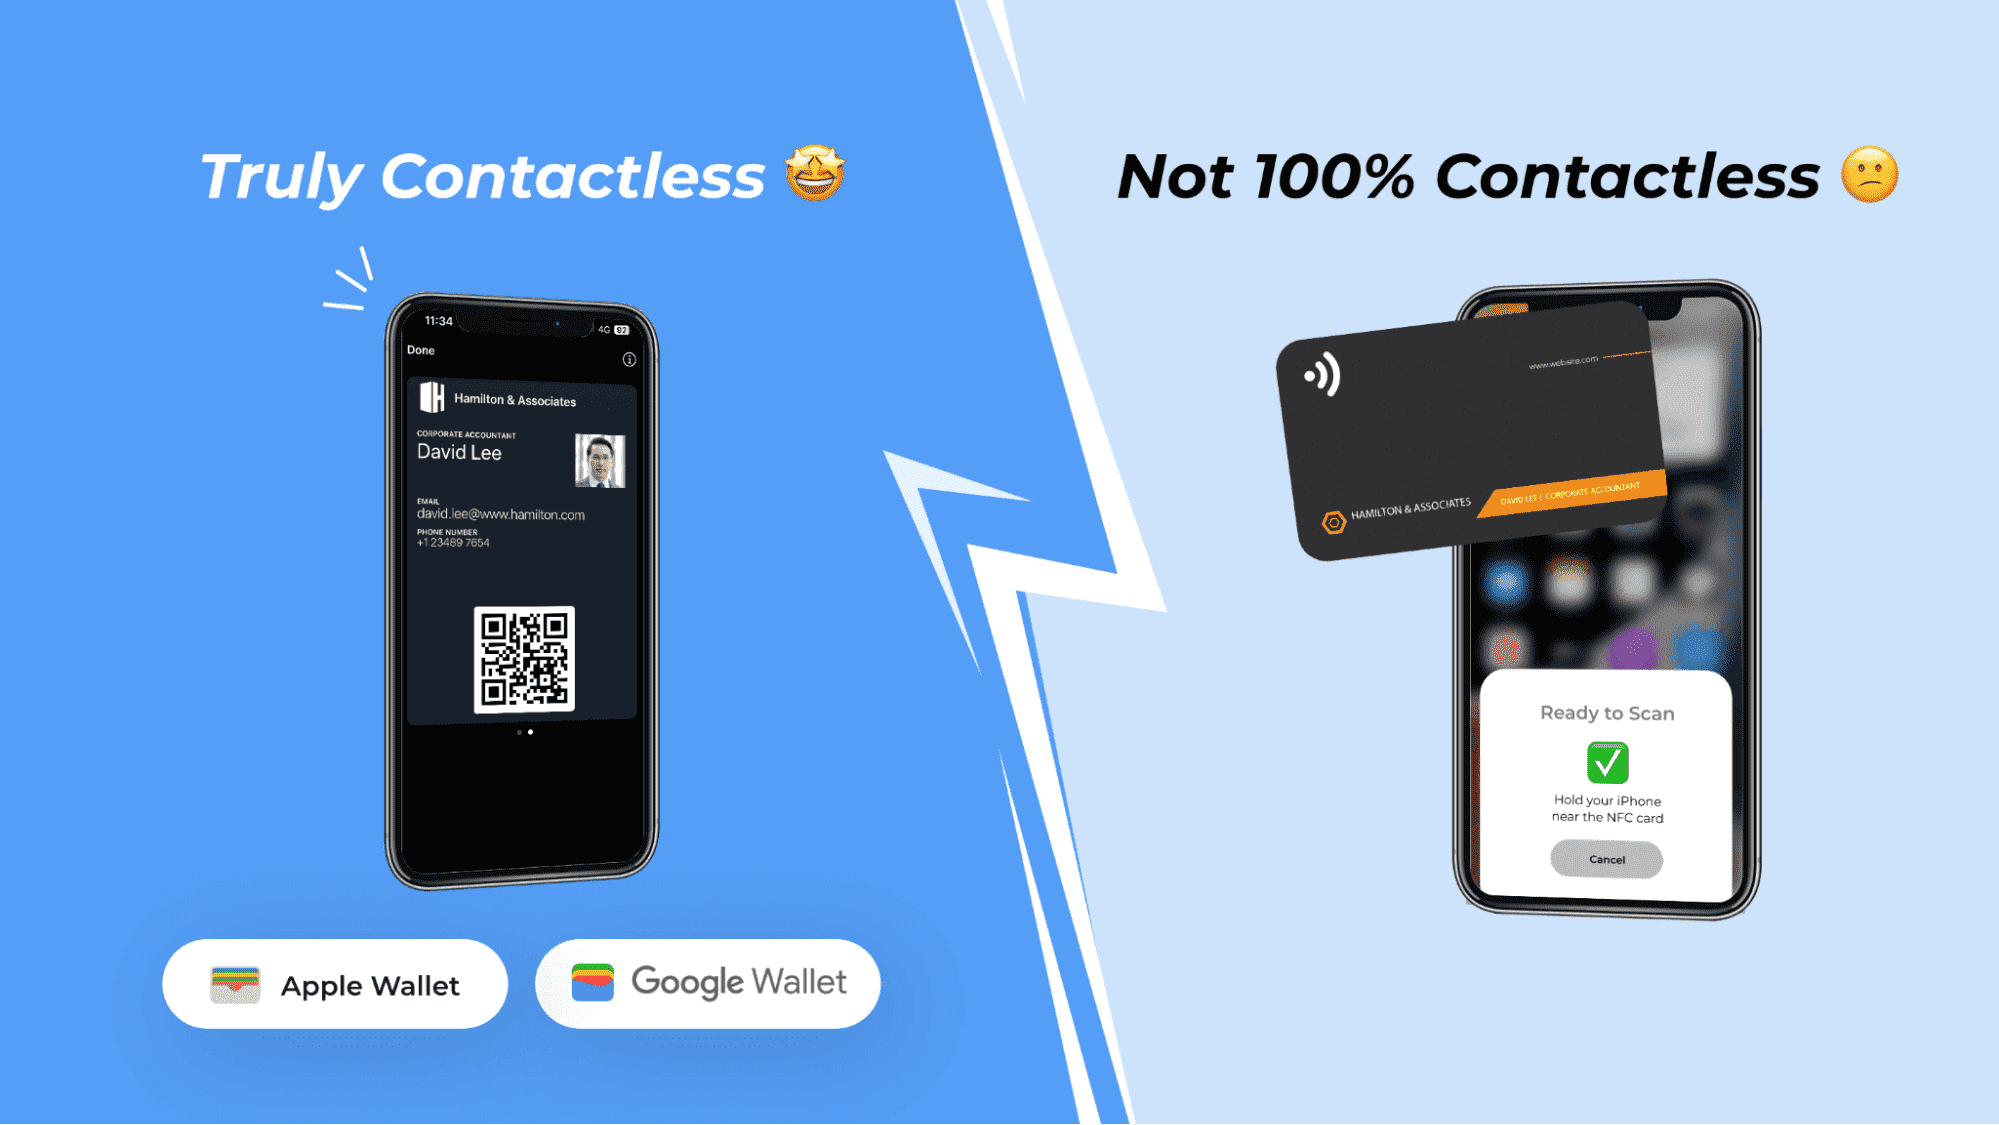  A truly contactless business card can be generated and shared digitally via your Apple or Google Wallet